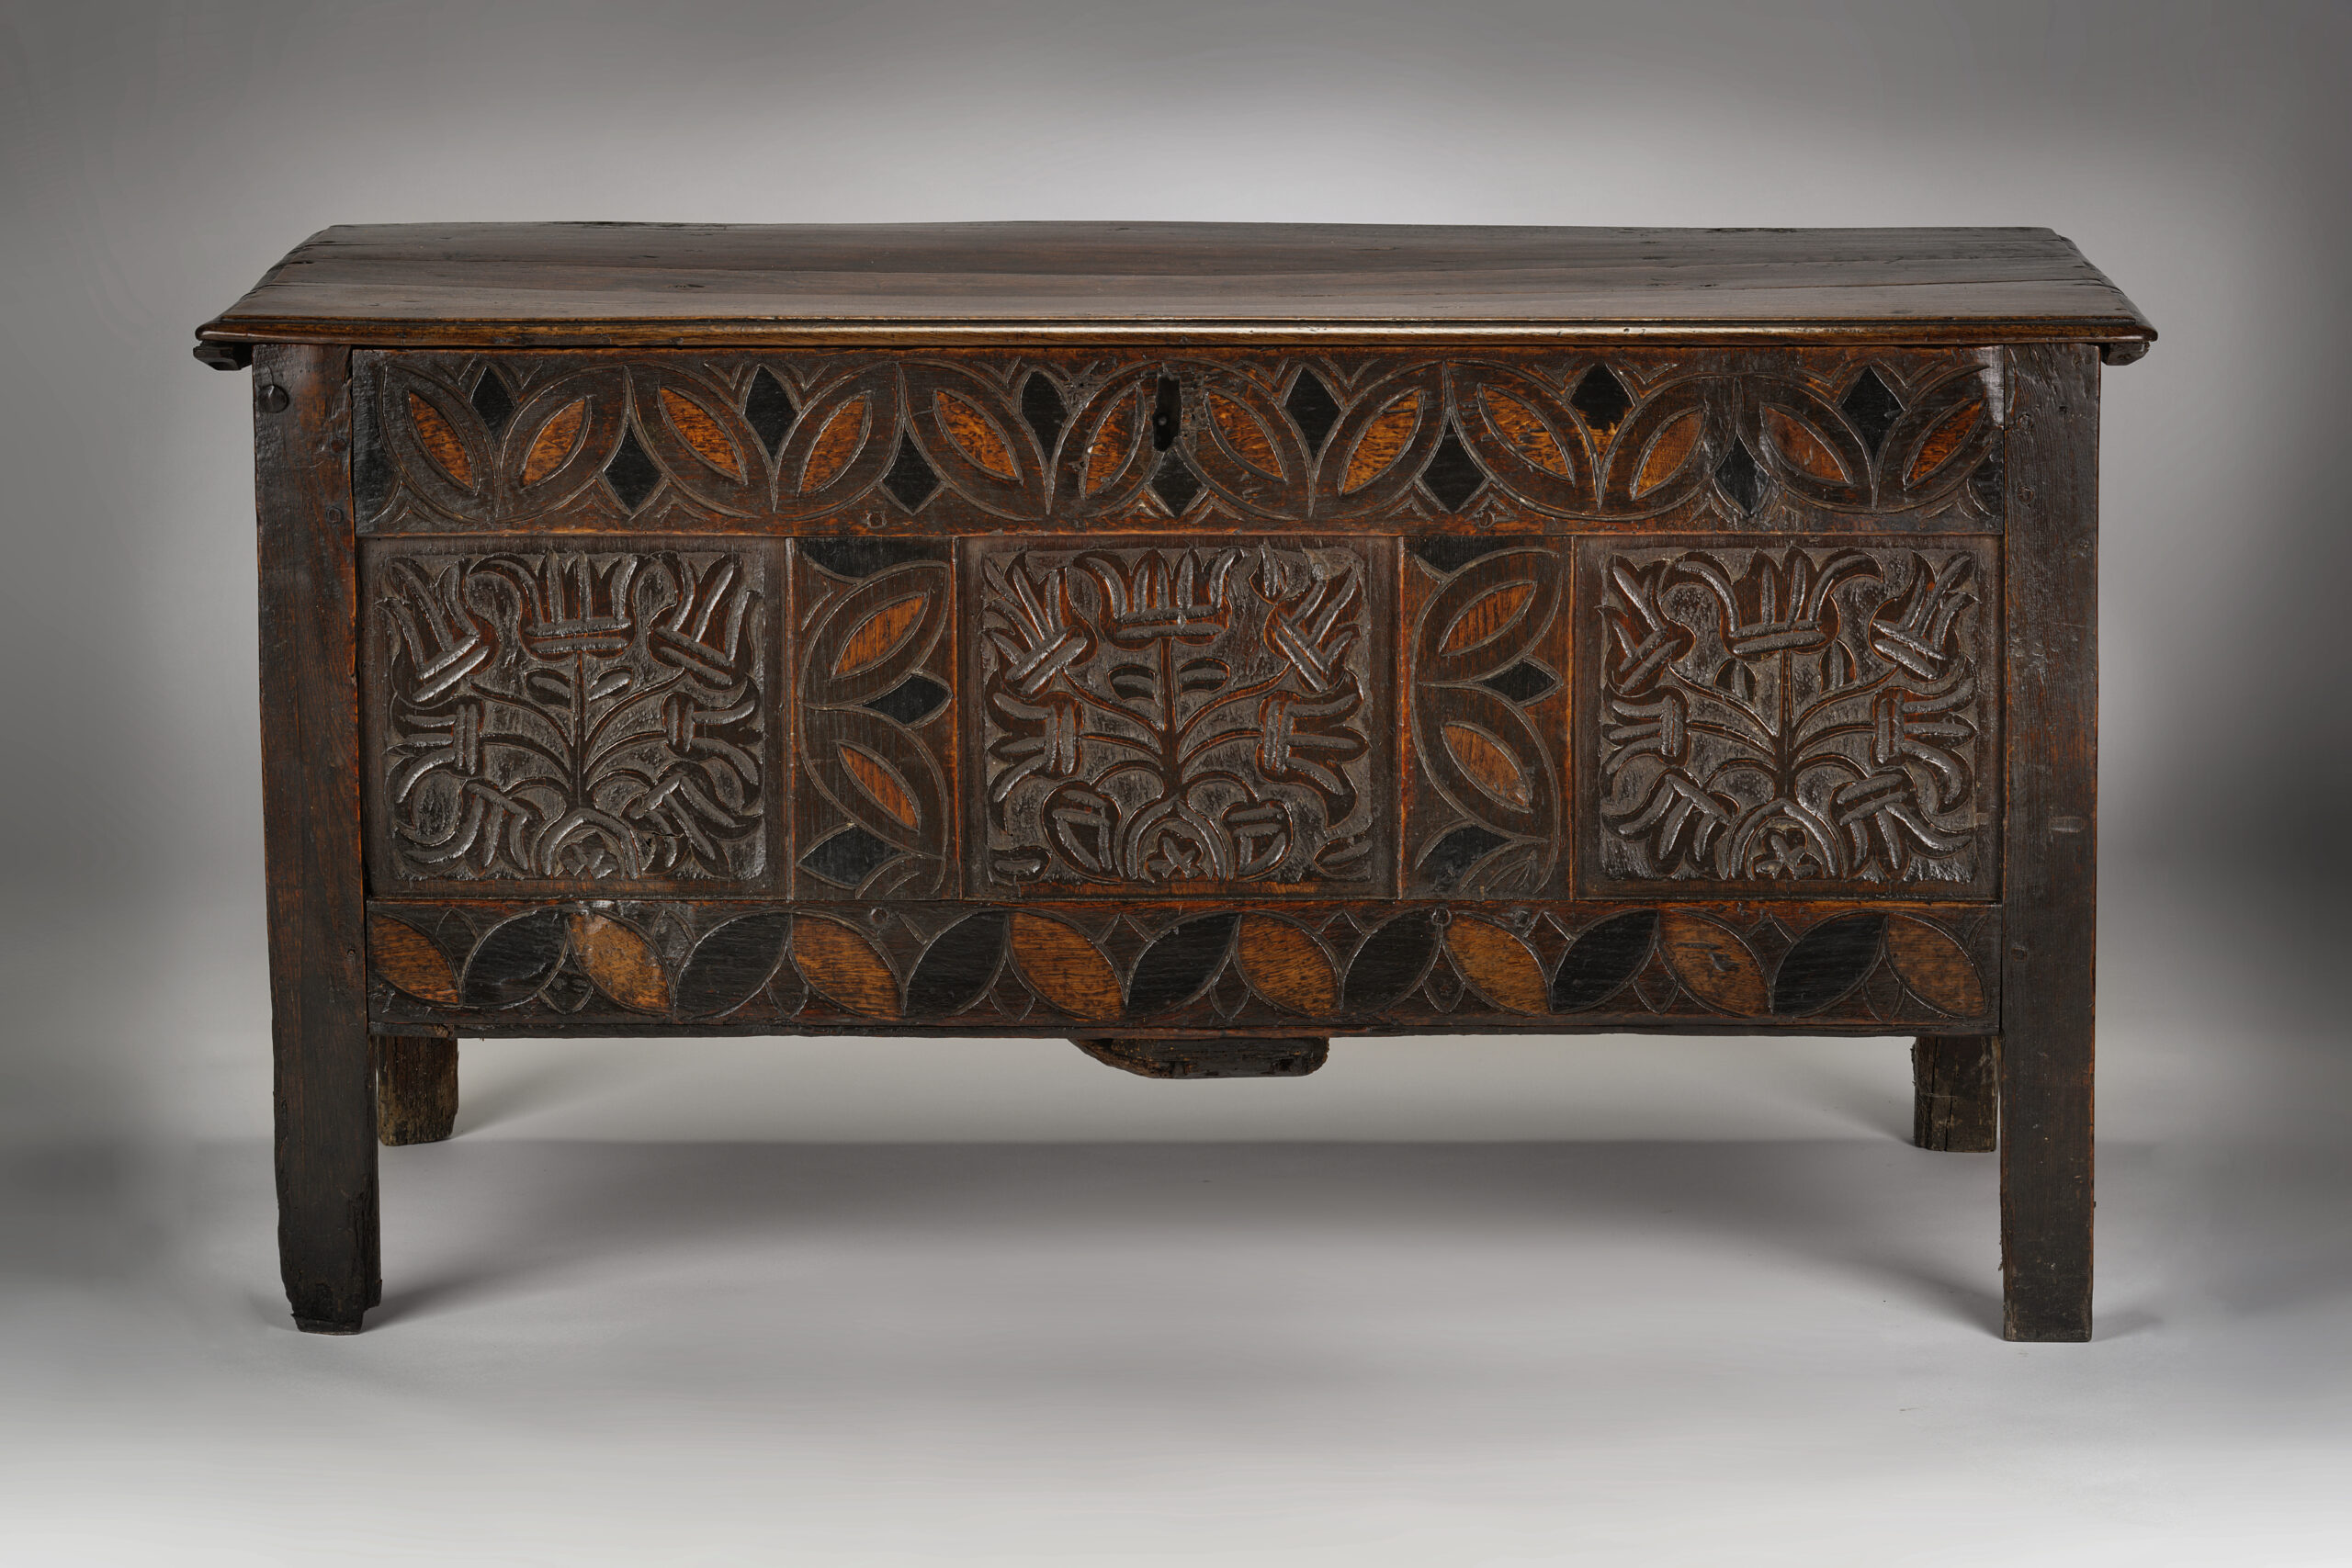 Image of A Small West-Country Oak Chest Circa 1670.